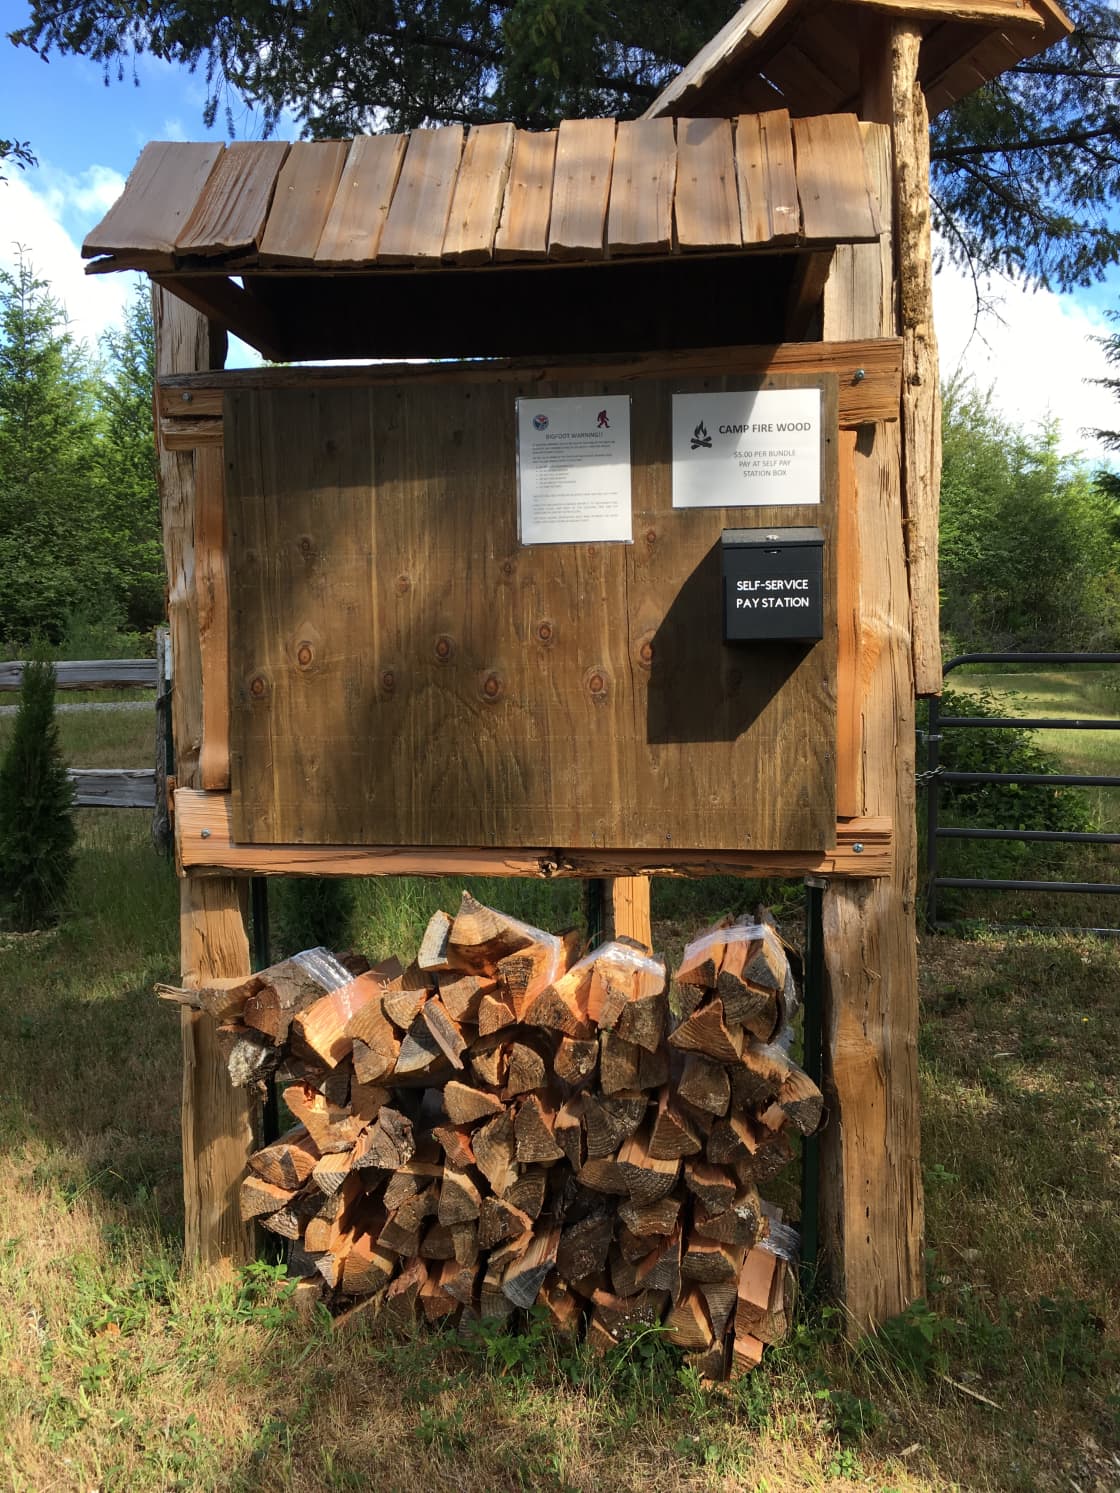 Firewood available for $5 per bundle. Pay at self pay station. Foraging for firewood is permitted.